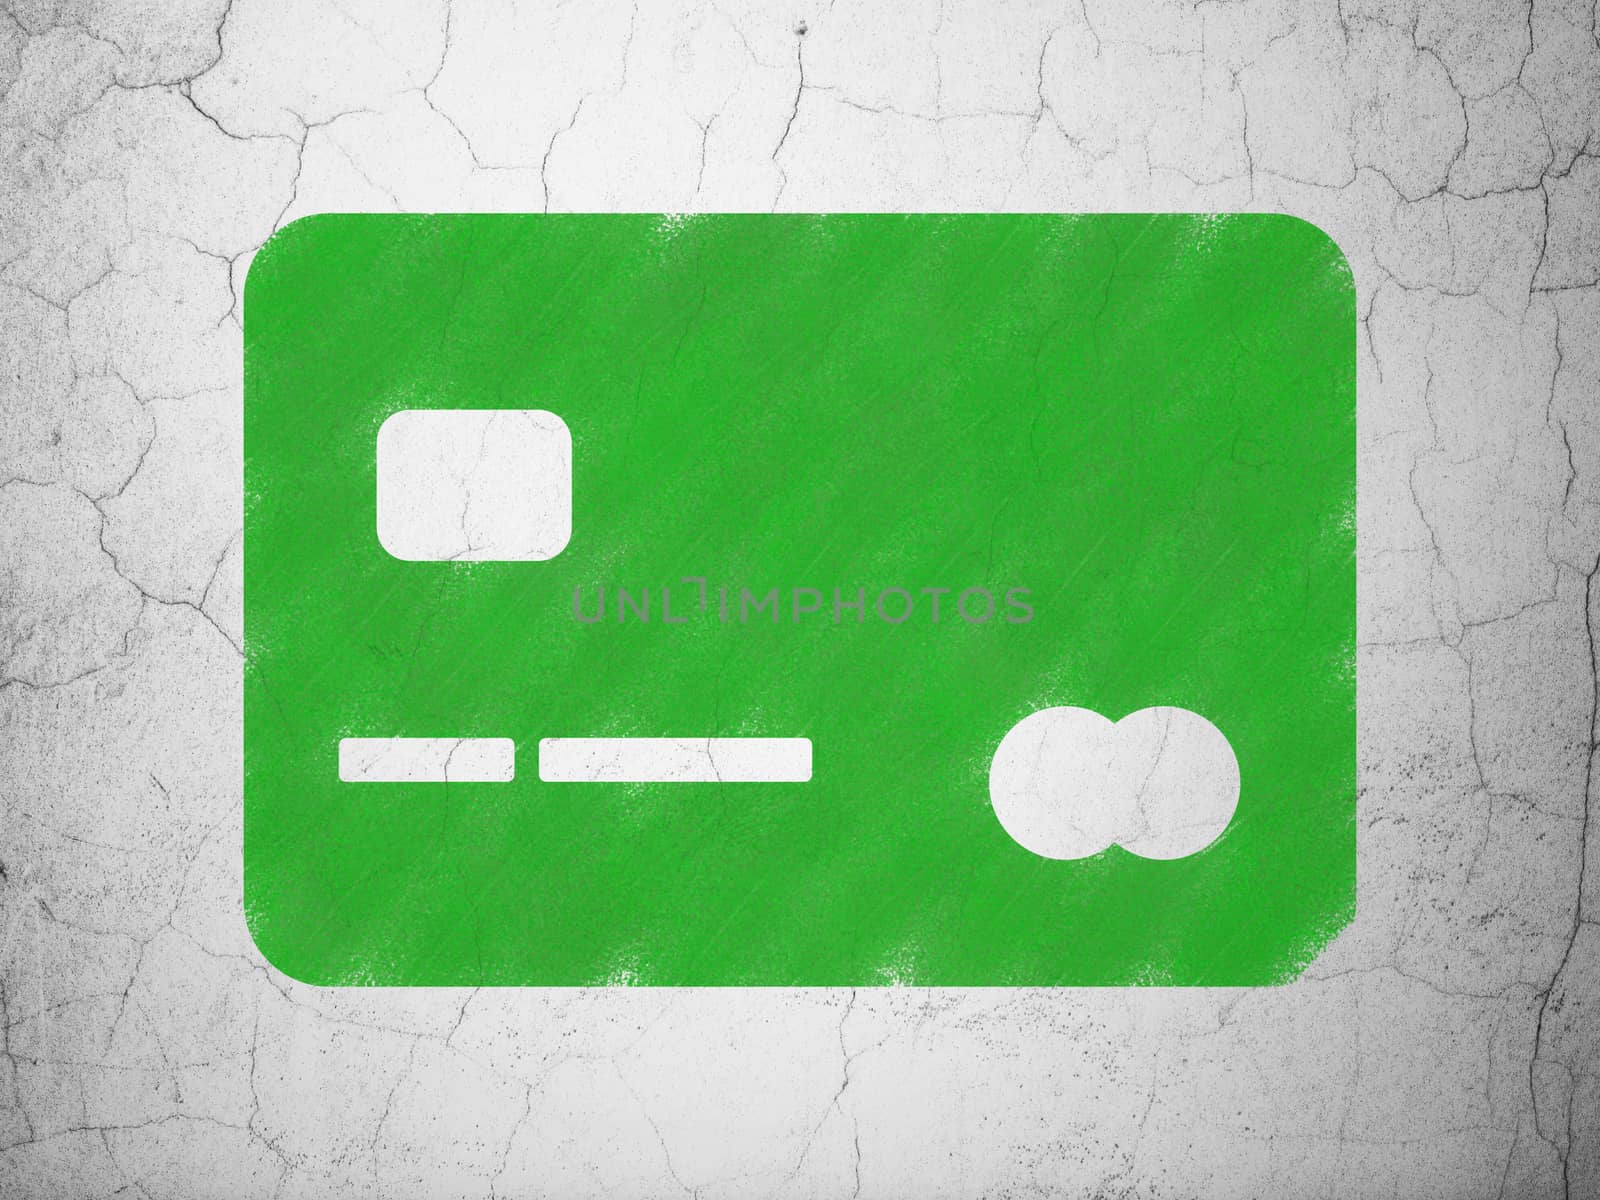 Finance concept: Green Credit Card on textured concrete wall background